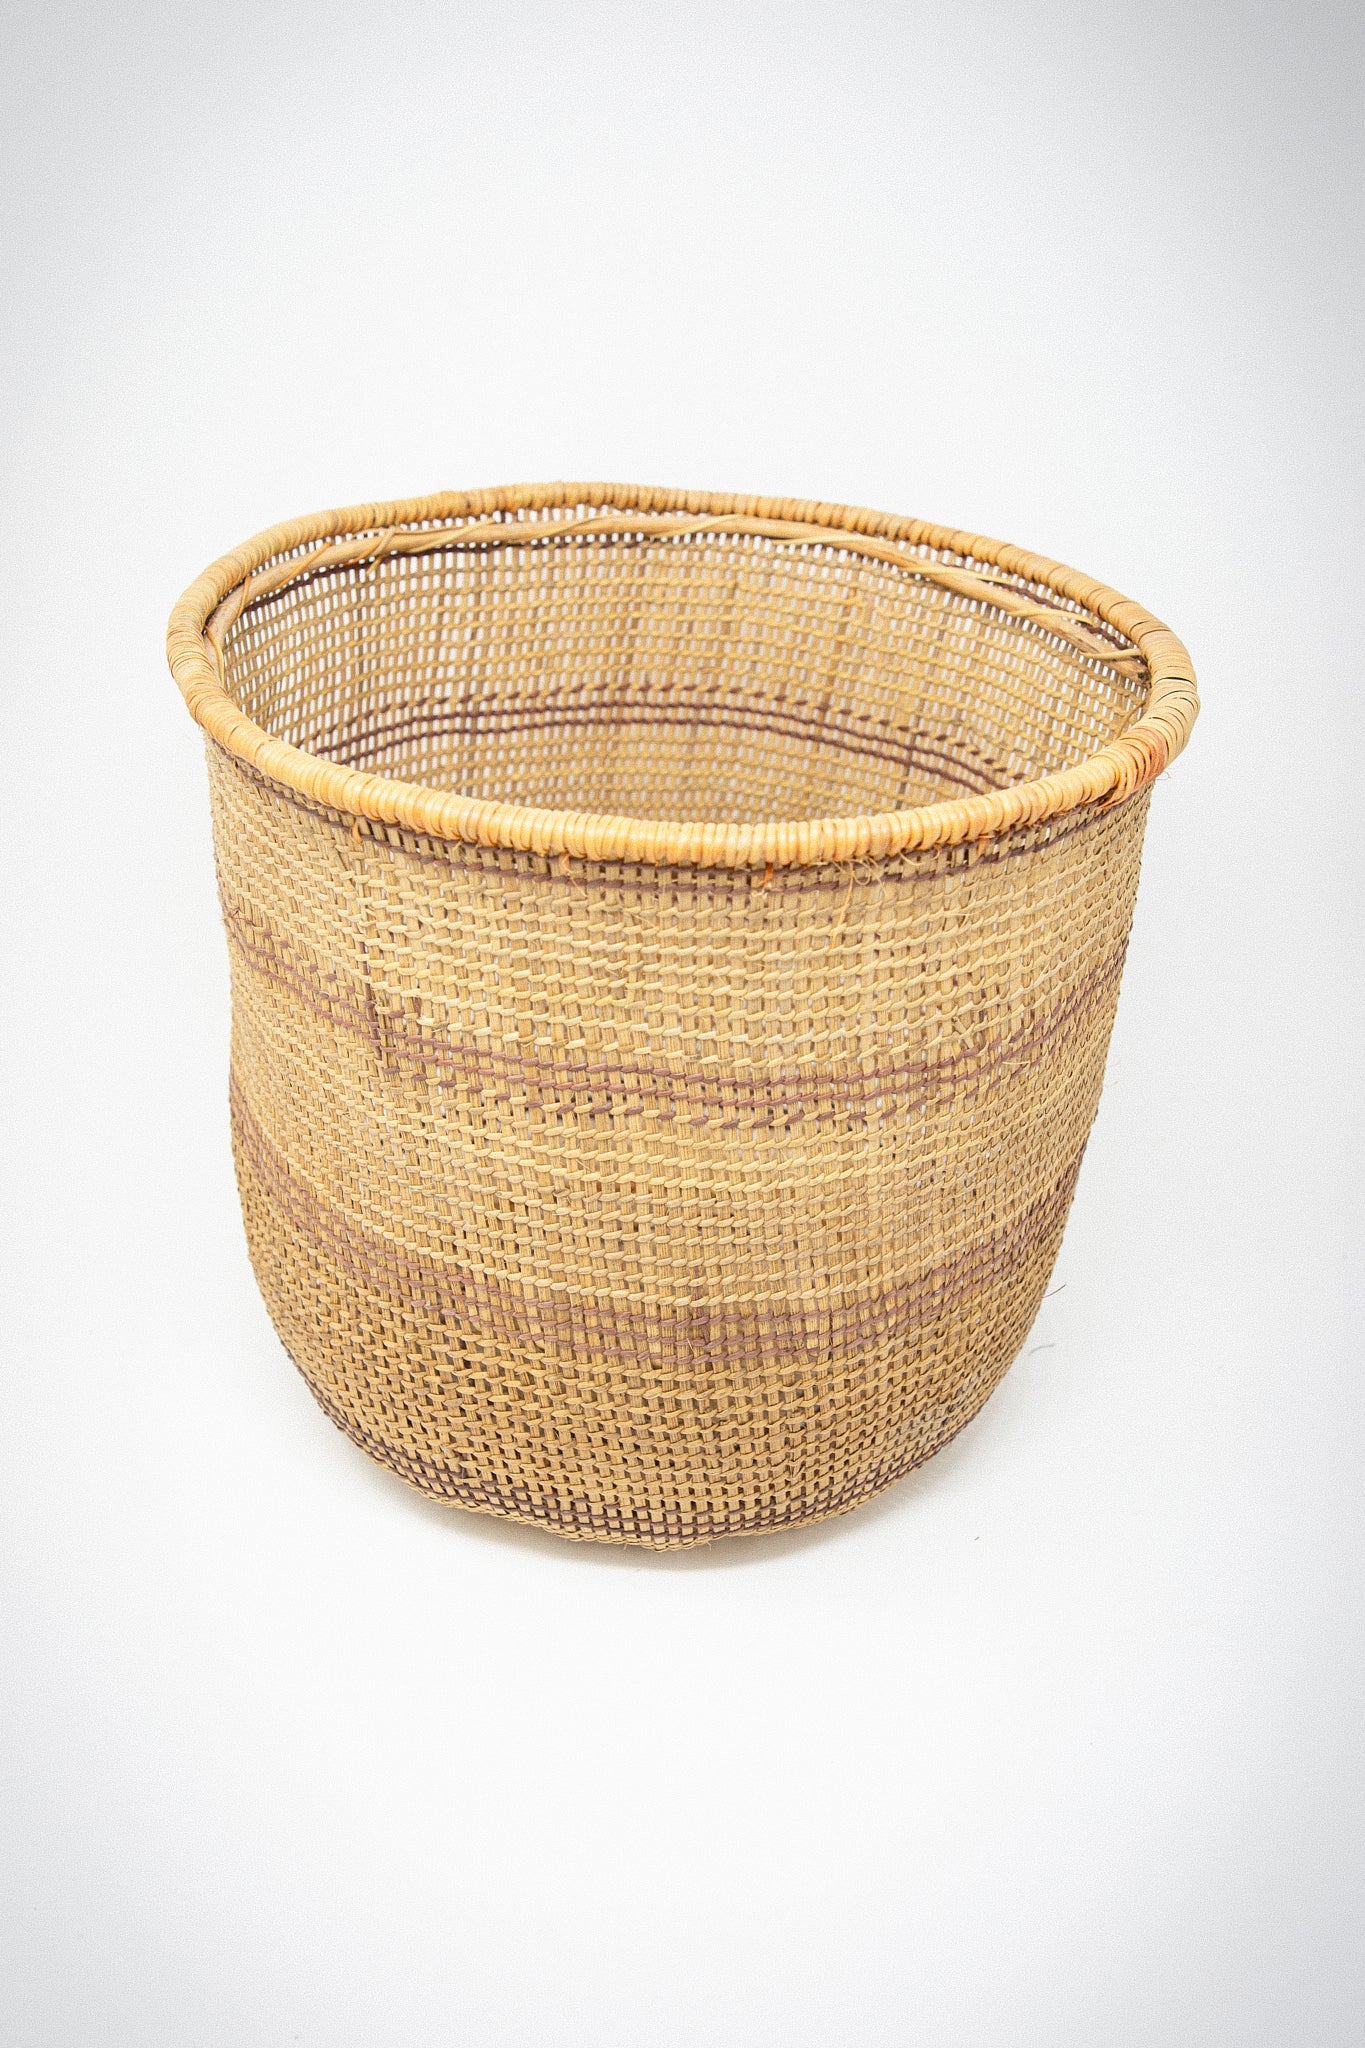 A Medium Nukak Makú basket beautifully handwoven with natural dyes on a white background by Plaza Bolivar.